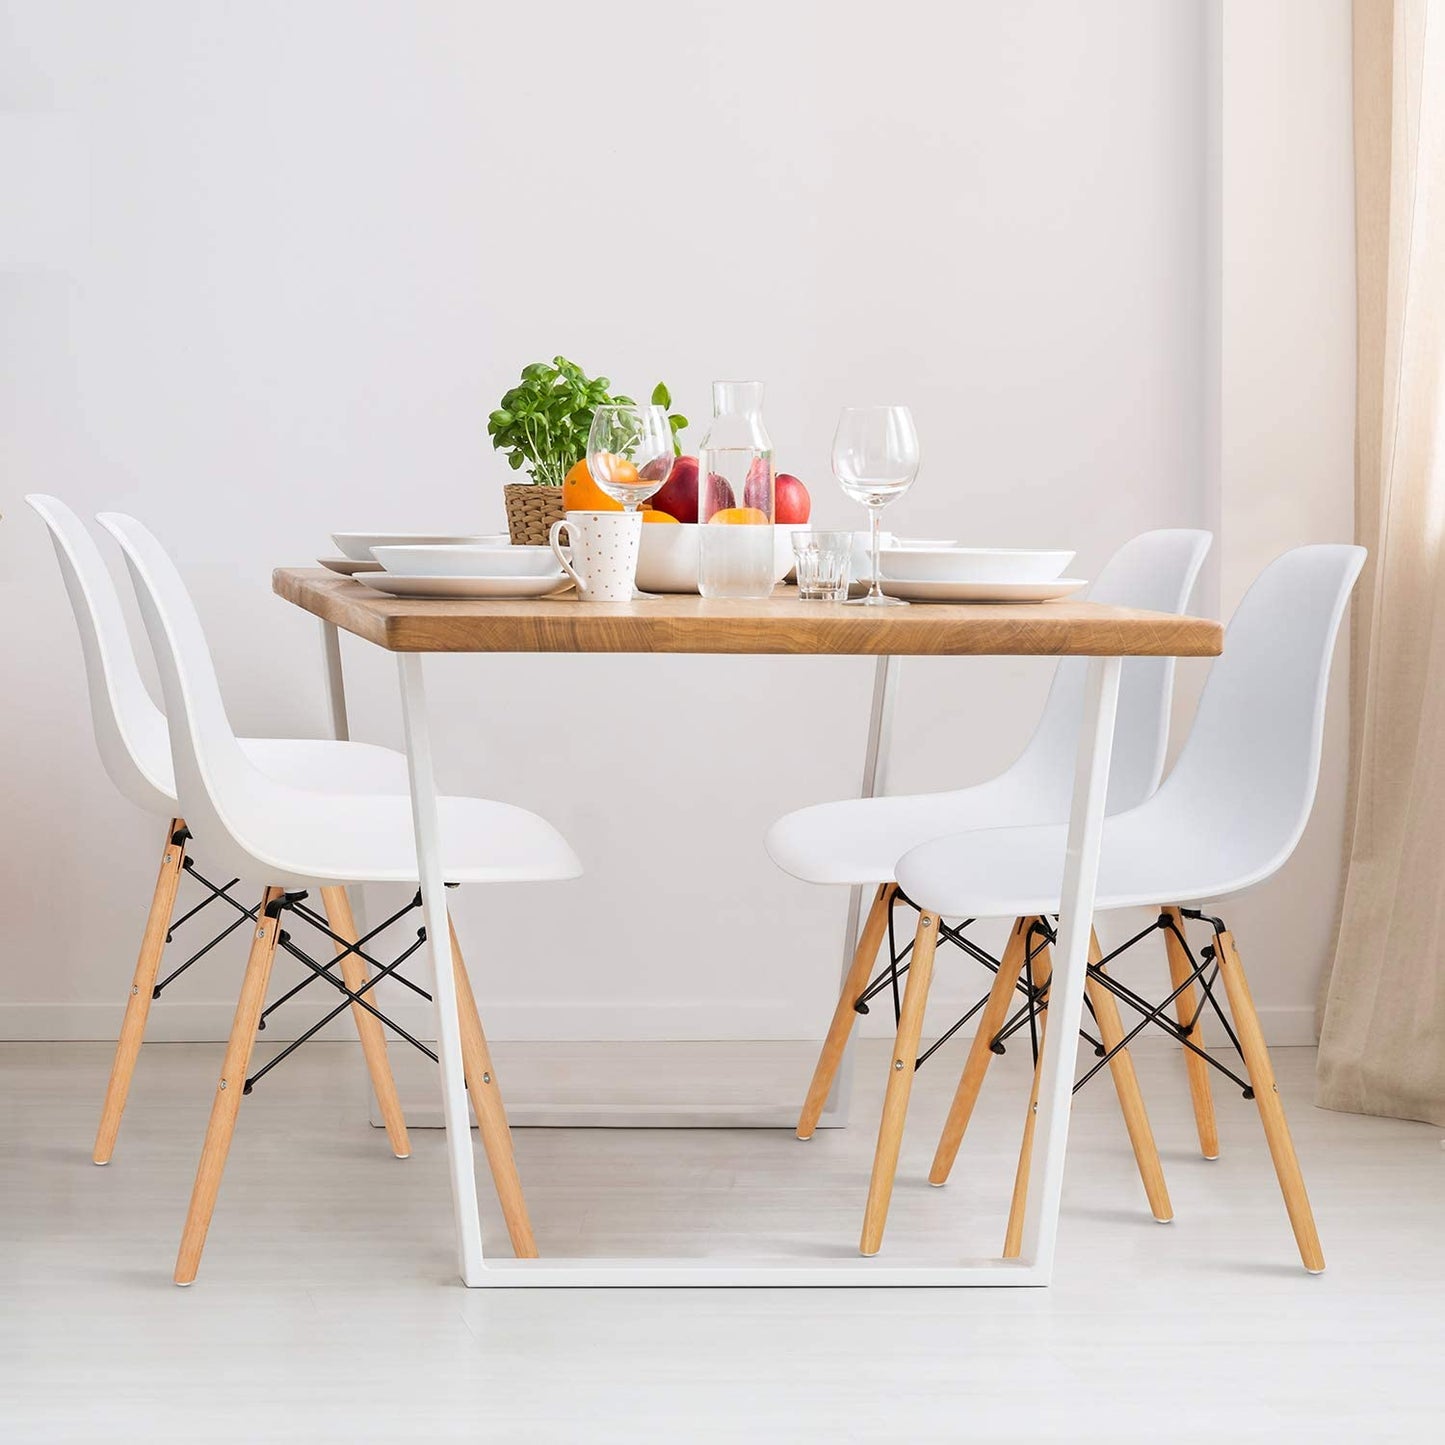 Set of 4 Modern Style Dining Chair, Shell Lounge Plastic Chair for Kitchen, Dining, Bedroom, Living Room Mid-Century Modern Side Chairs with Wooden Walnut Legs